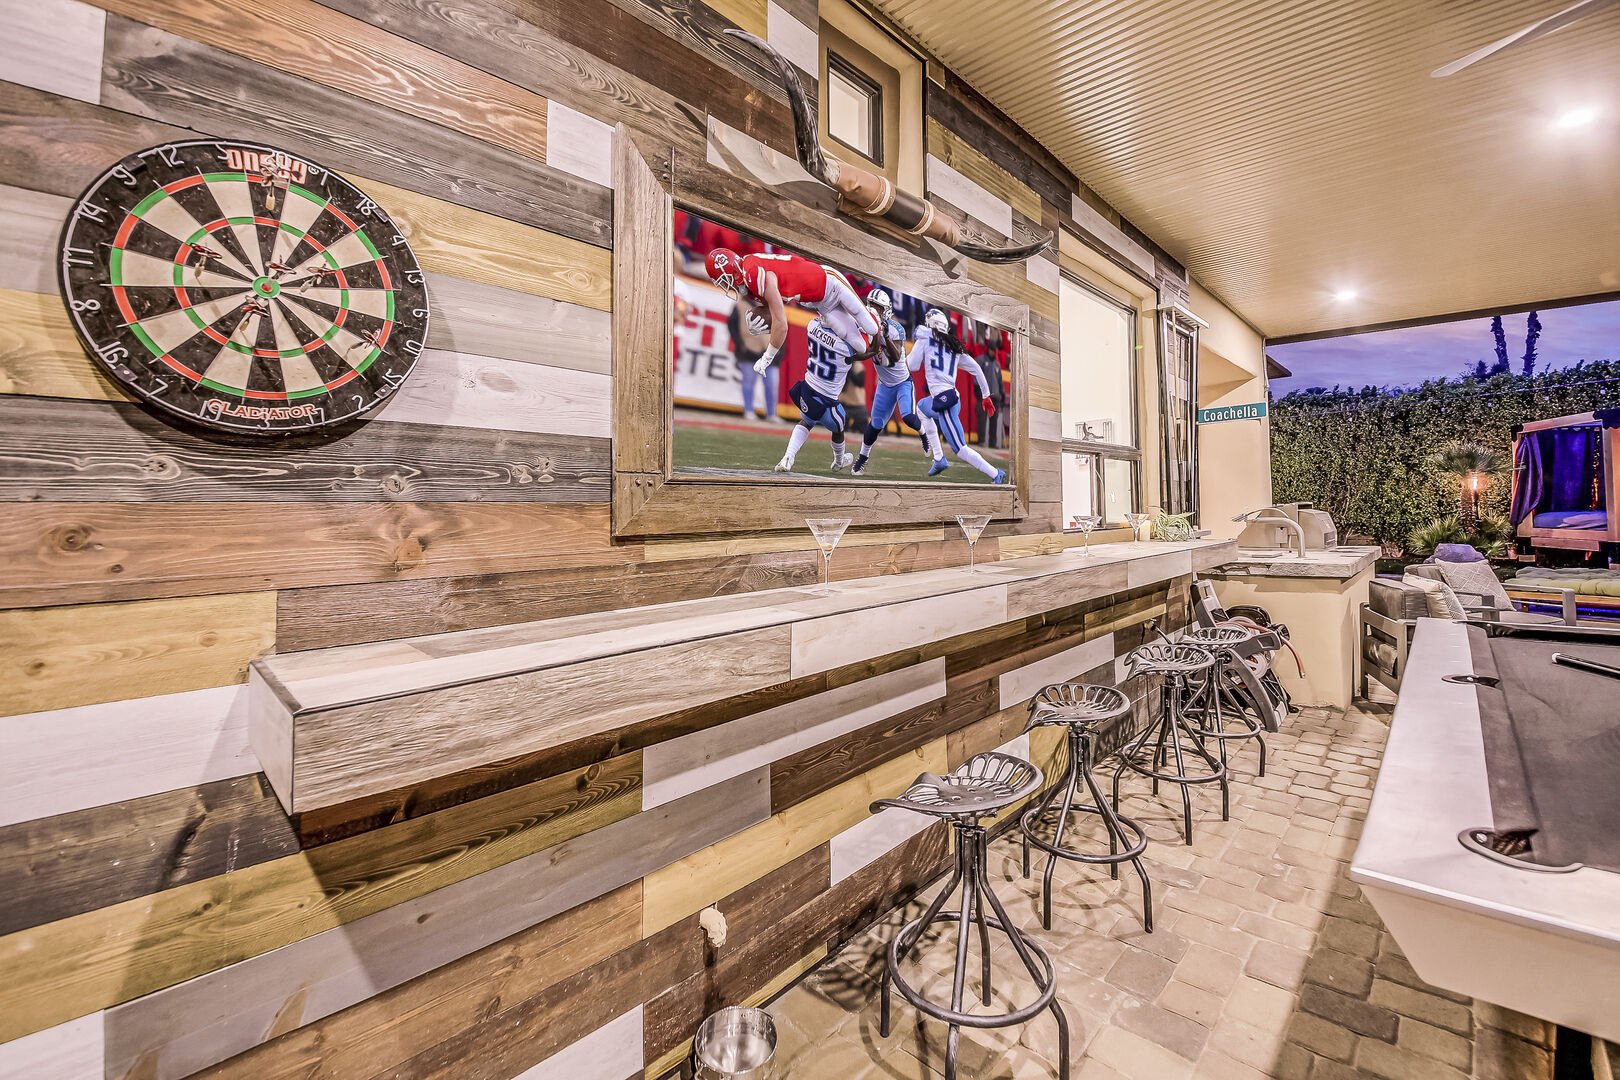 Play a round of darts and enjoy your favorite shows from the smart outdoor TV.